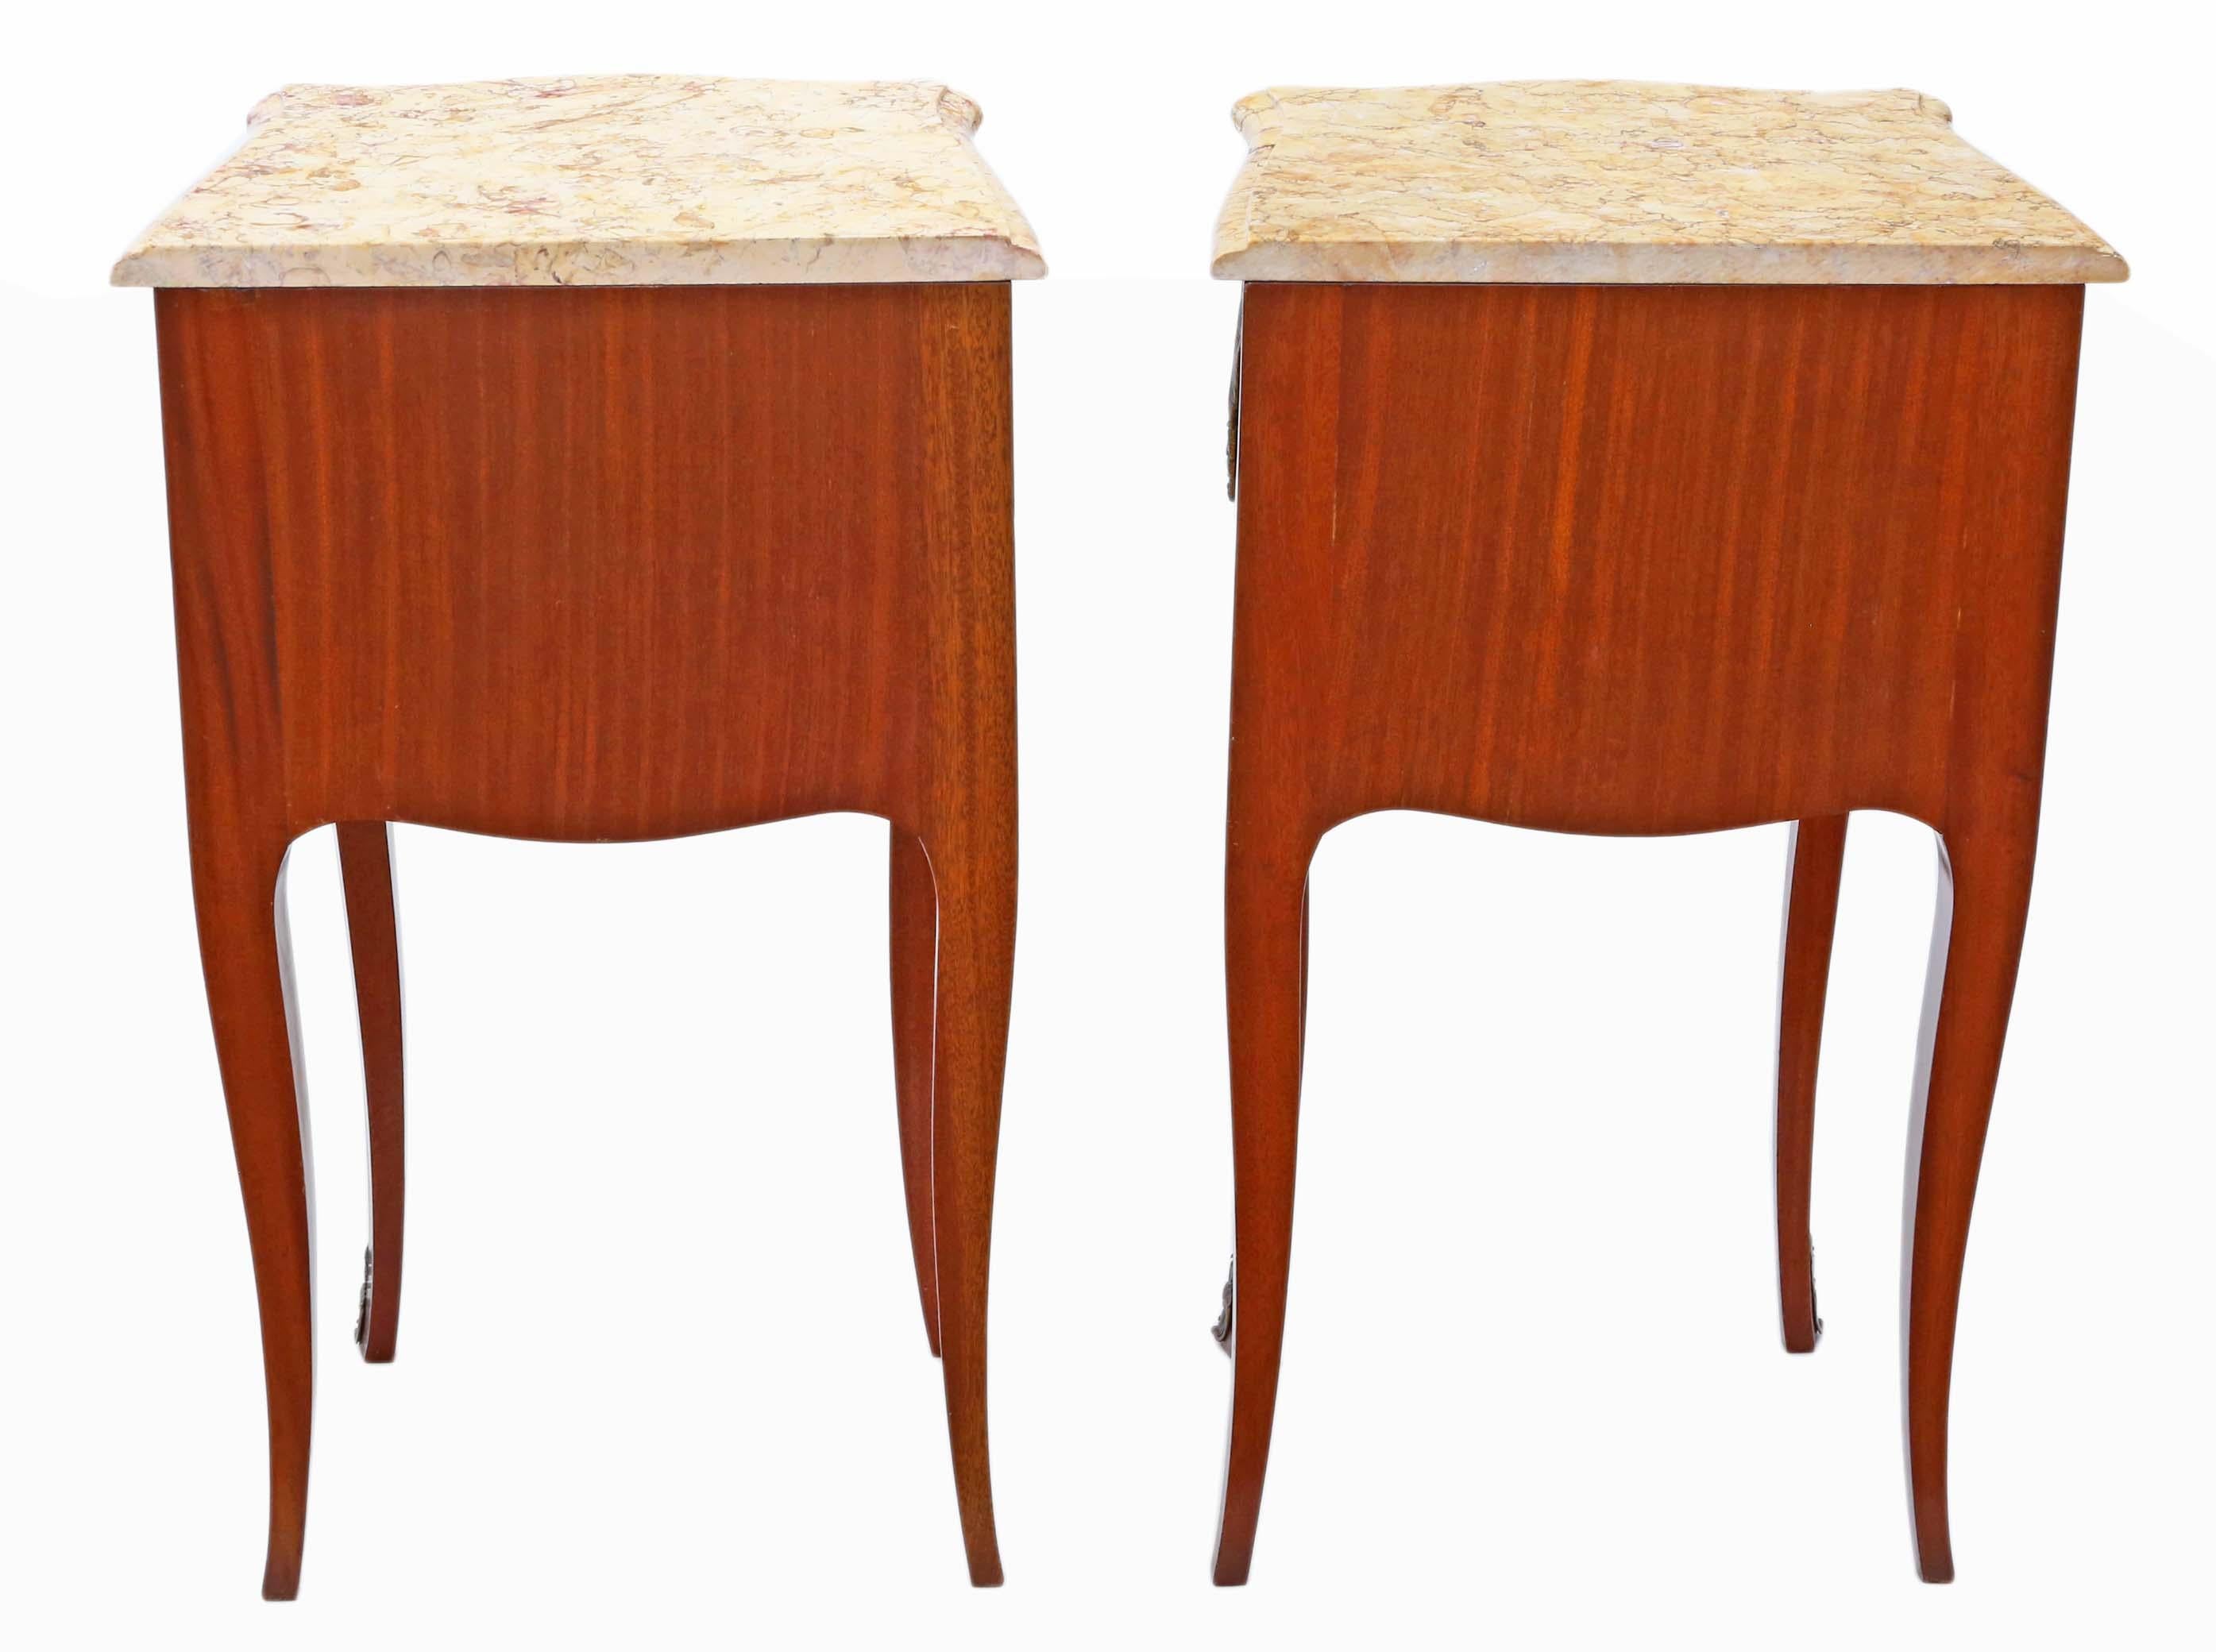 Early 20th Century Pair of French Inlaid Marquetry Marble Bedside Tables